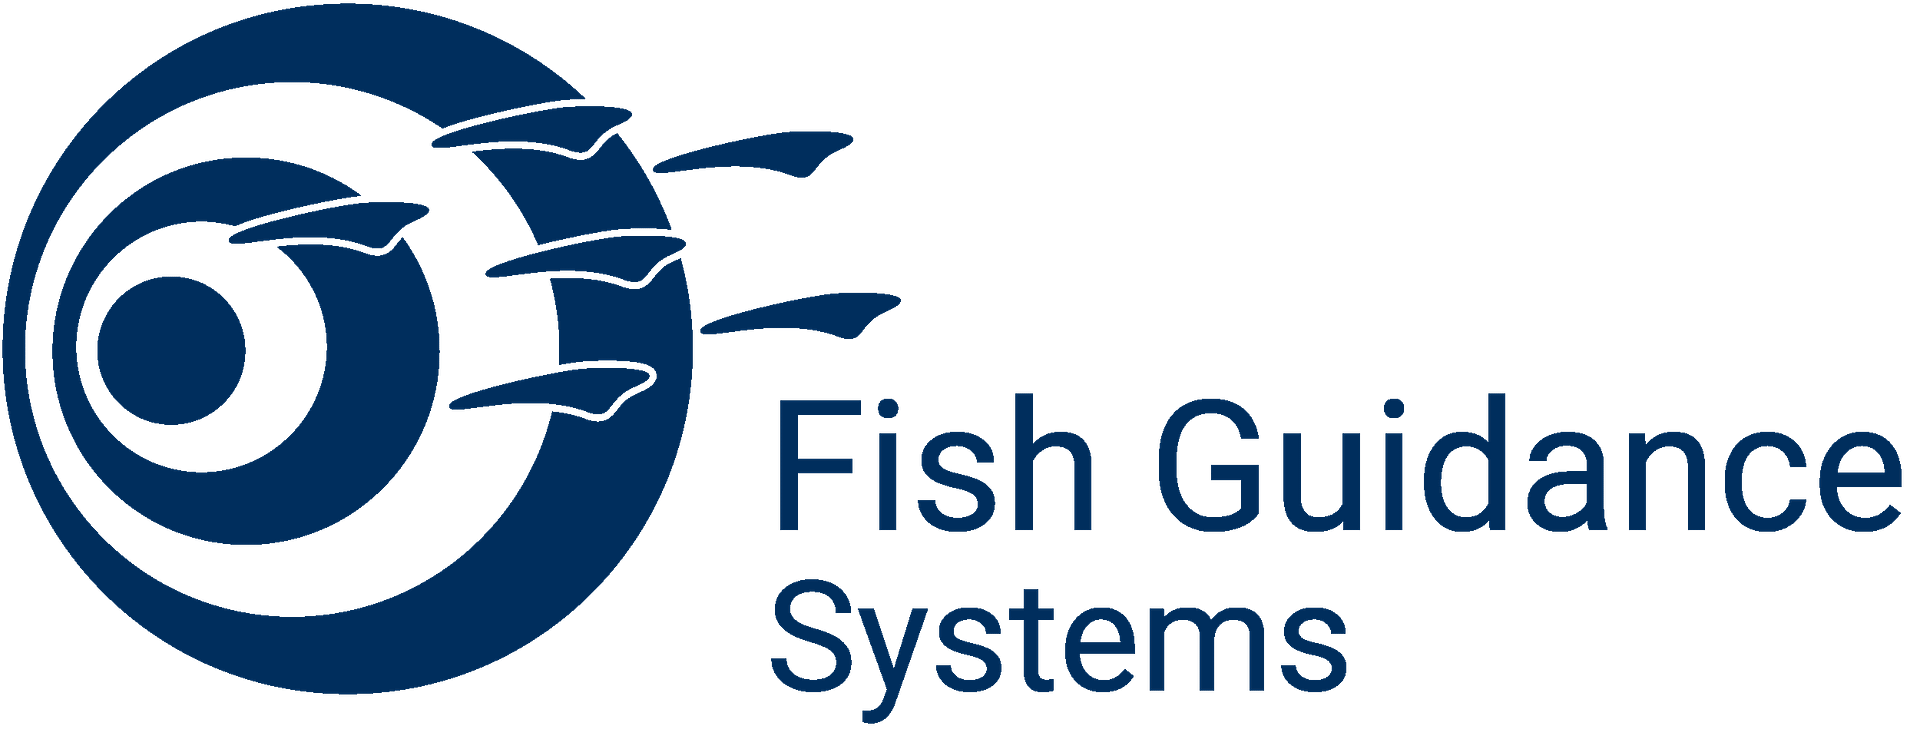 Fish Guidance Systems